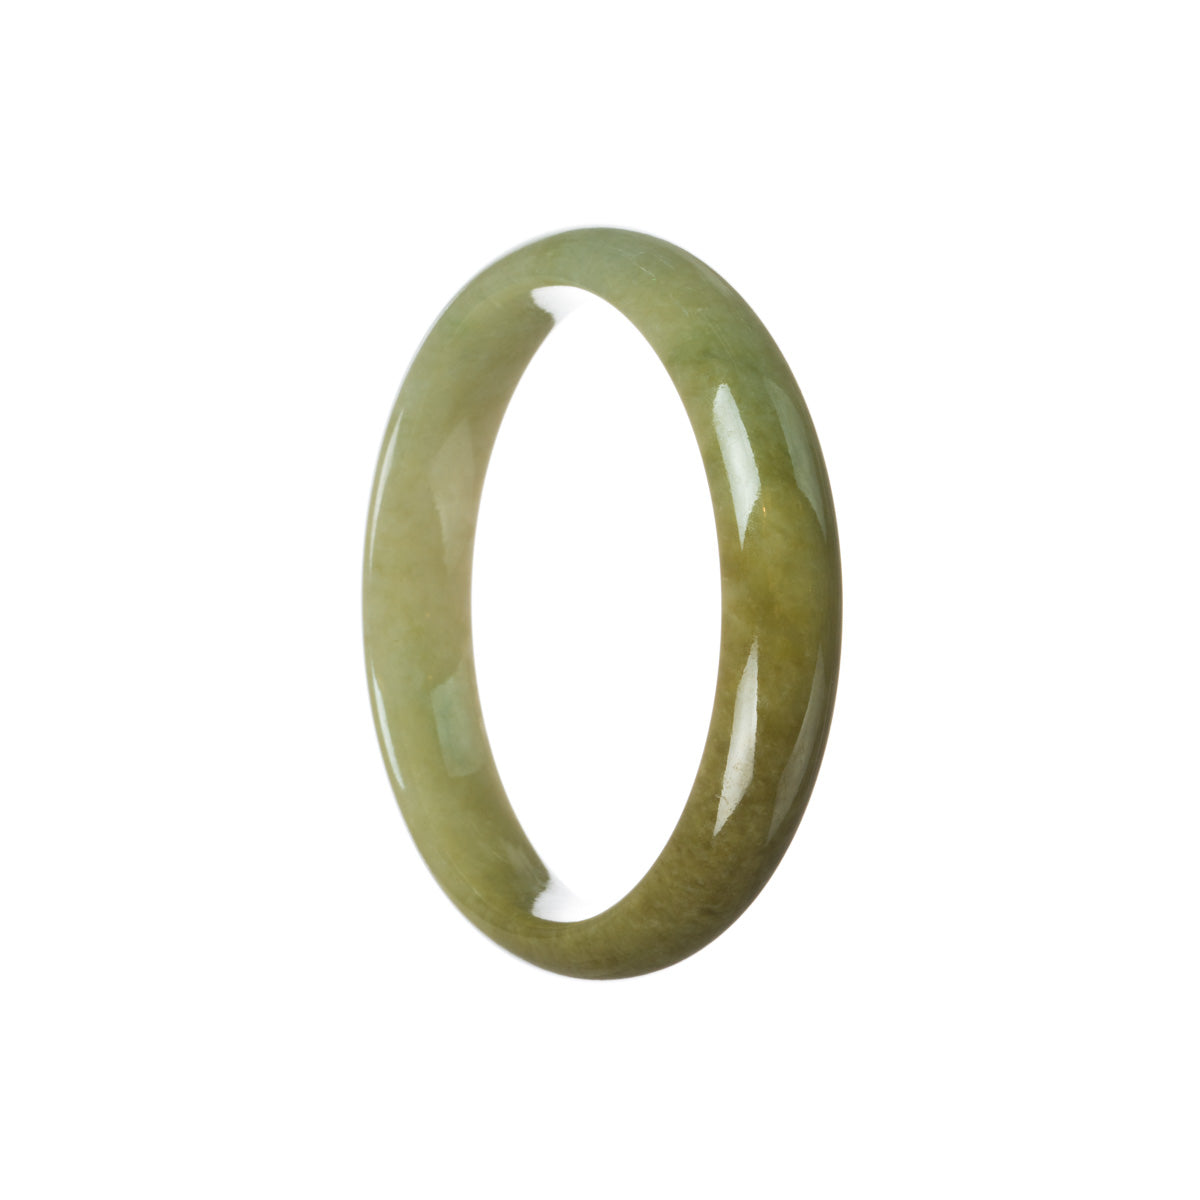 A real grade A brownish olive green jadeite bangle bracelet with a brown patch, in a half moon shape, measuring 59mm.